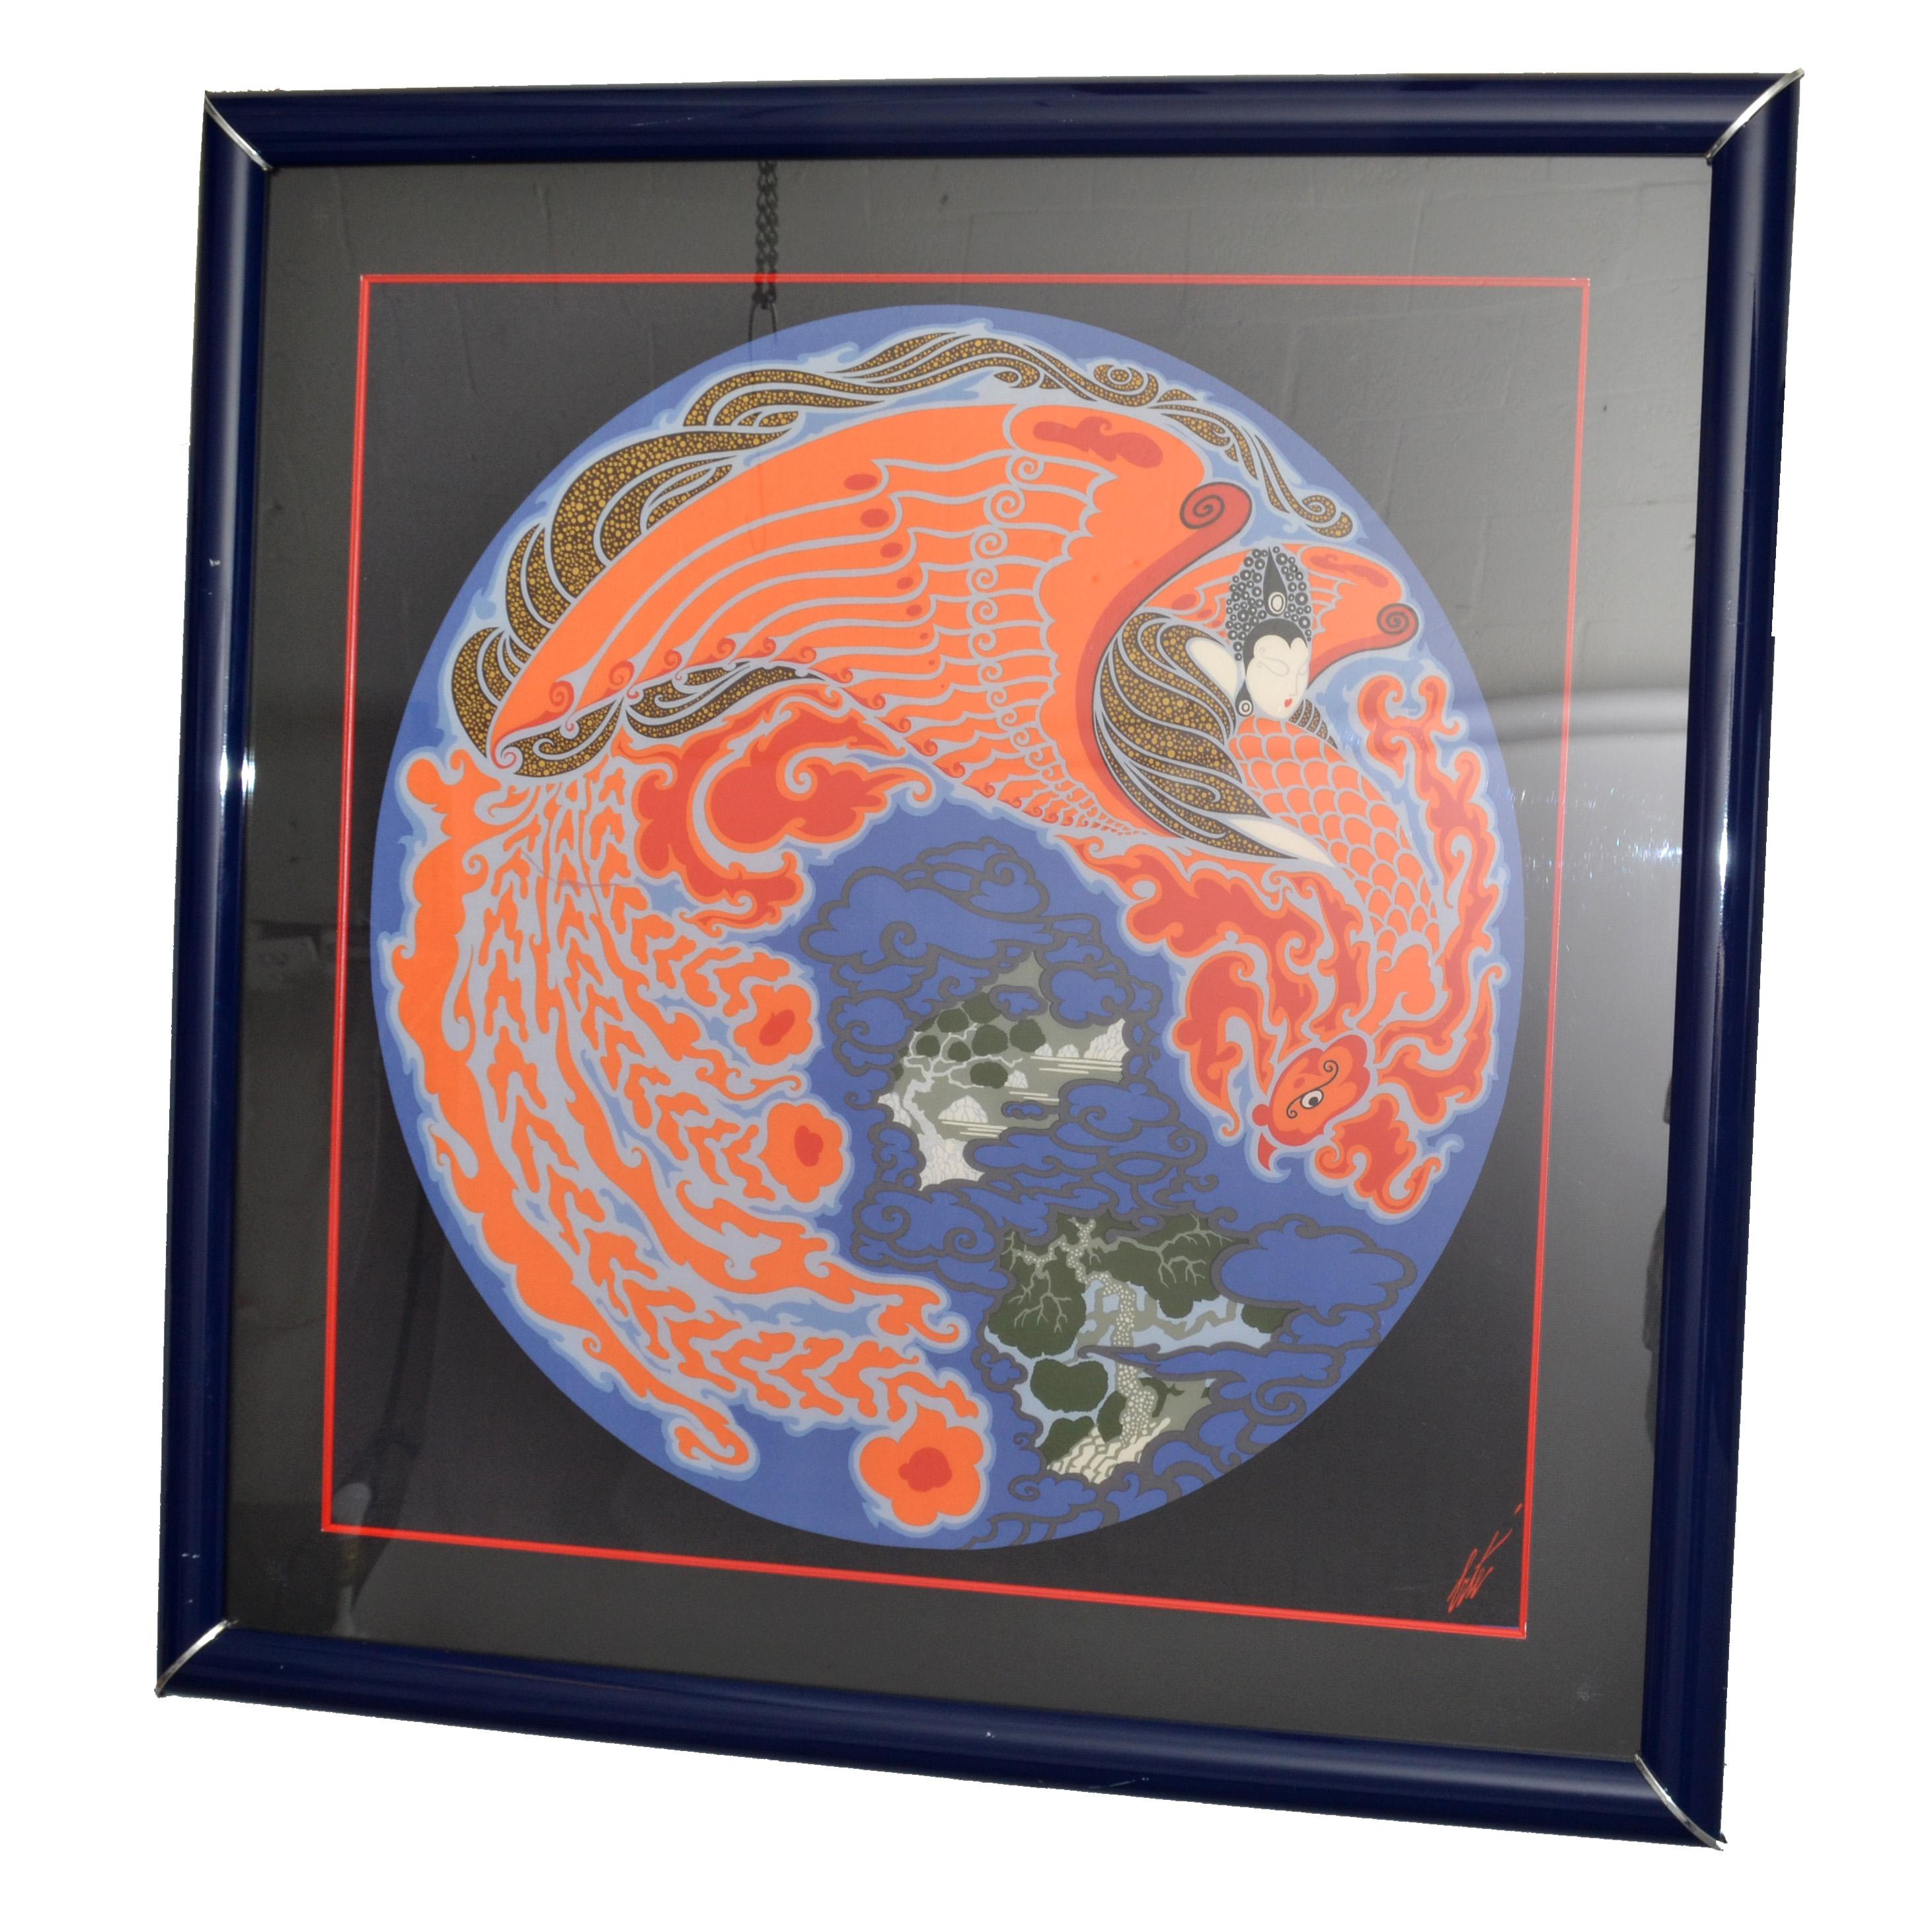 Art Deco framed silk sarf by Erté, titled dream Voyage scarf, signed lower right, depicting a female inside of world shaped image made in the early 1980s.
Royal blue wood frame with chrome decor.
Signed on the silk scarf.
Silk scarf size